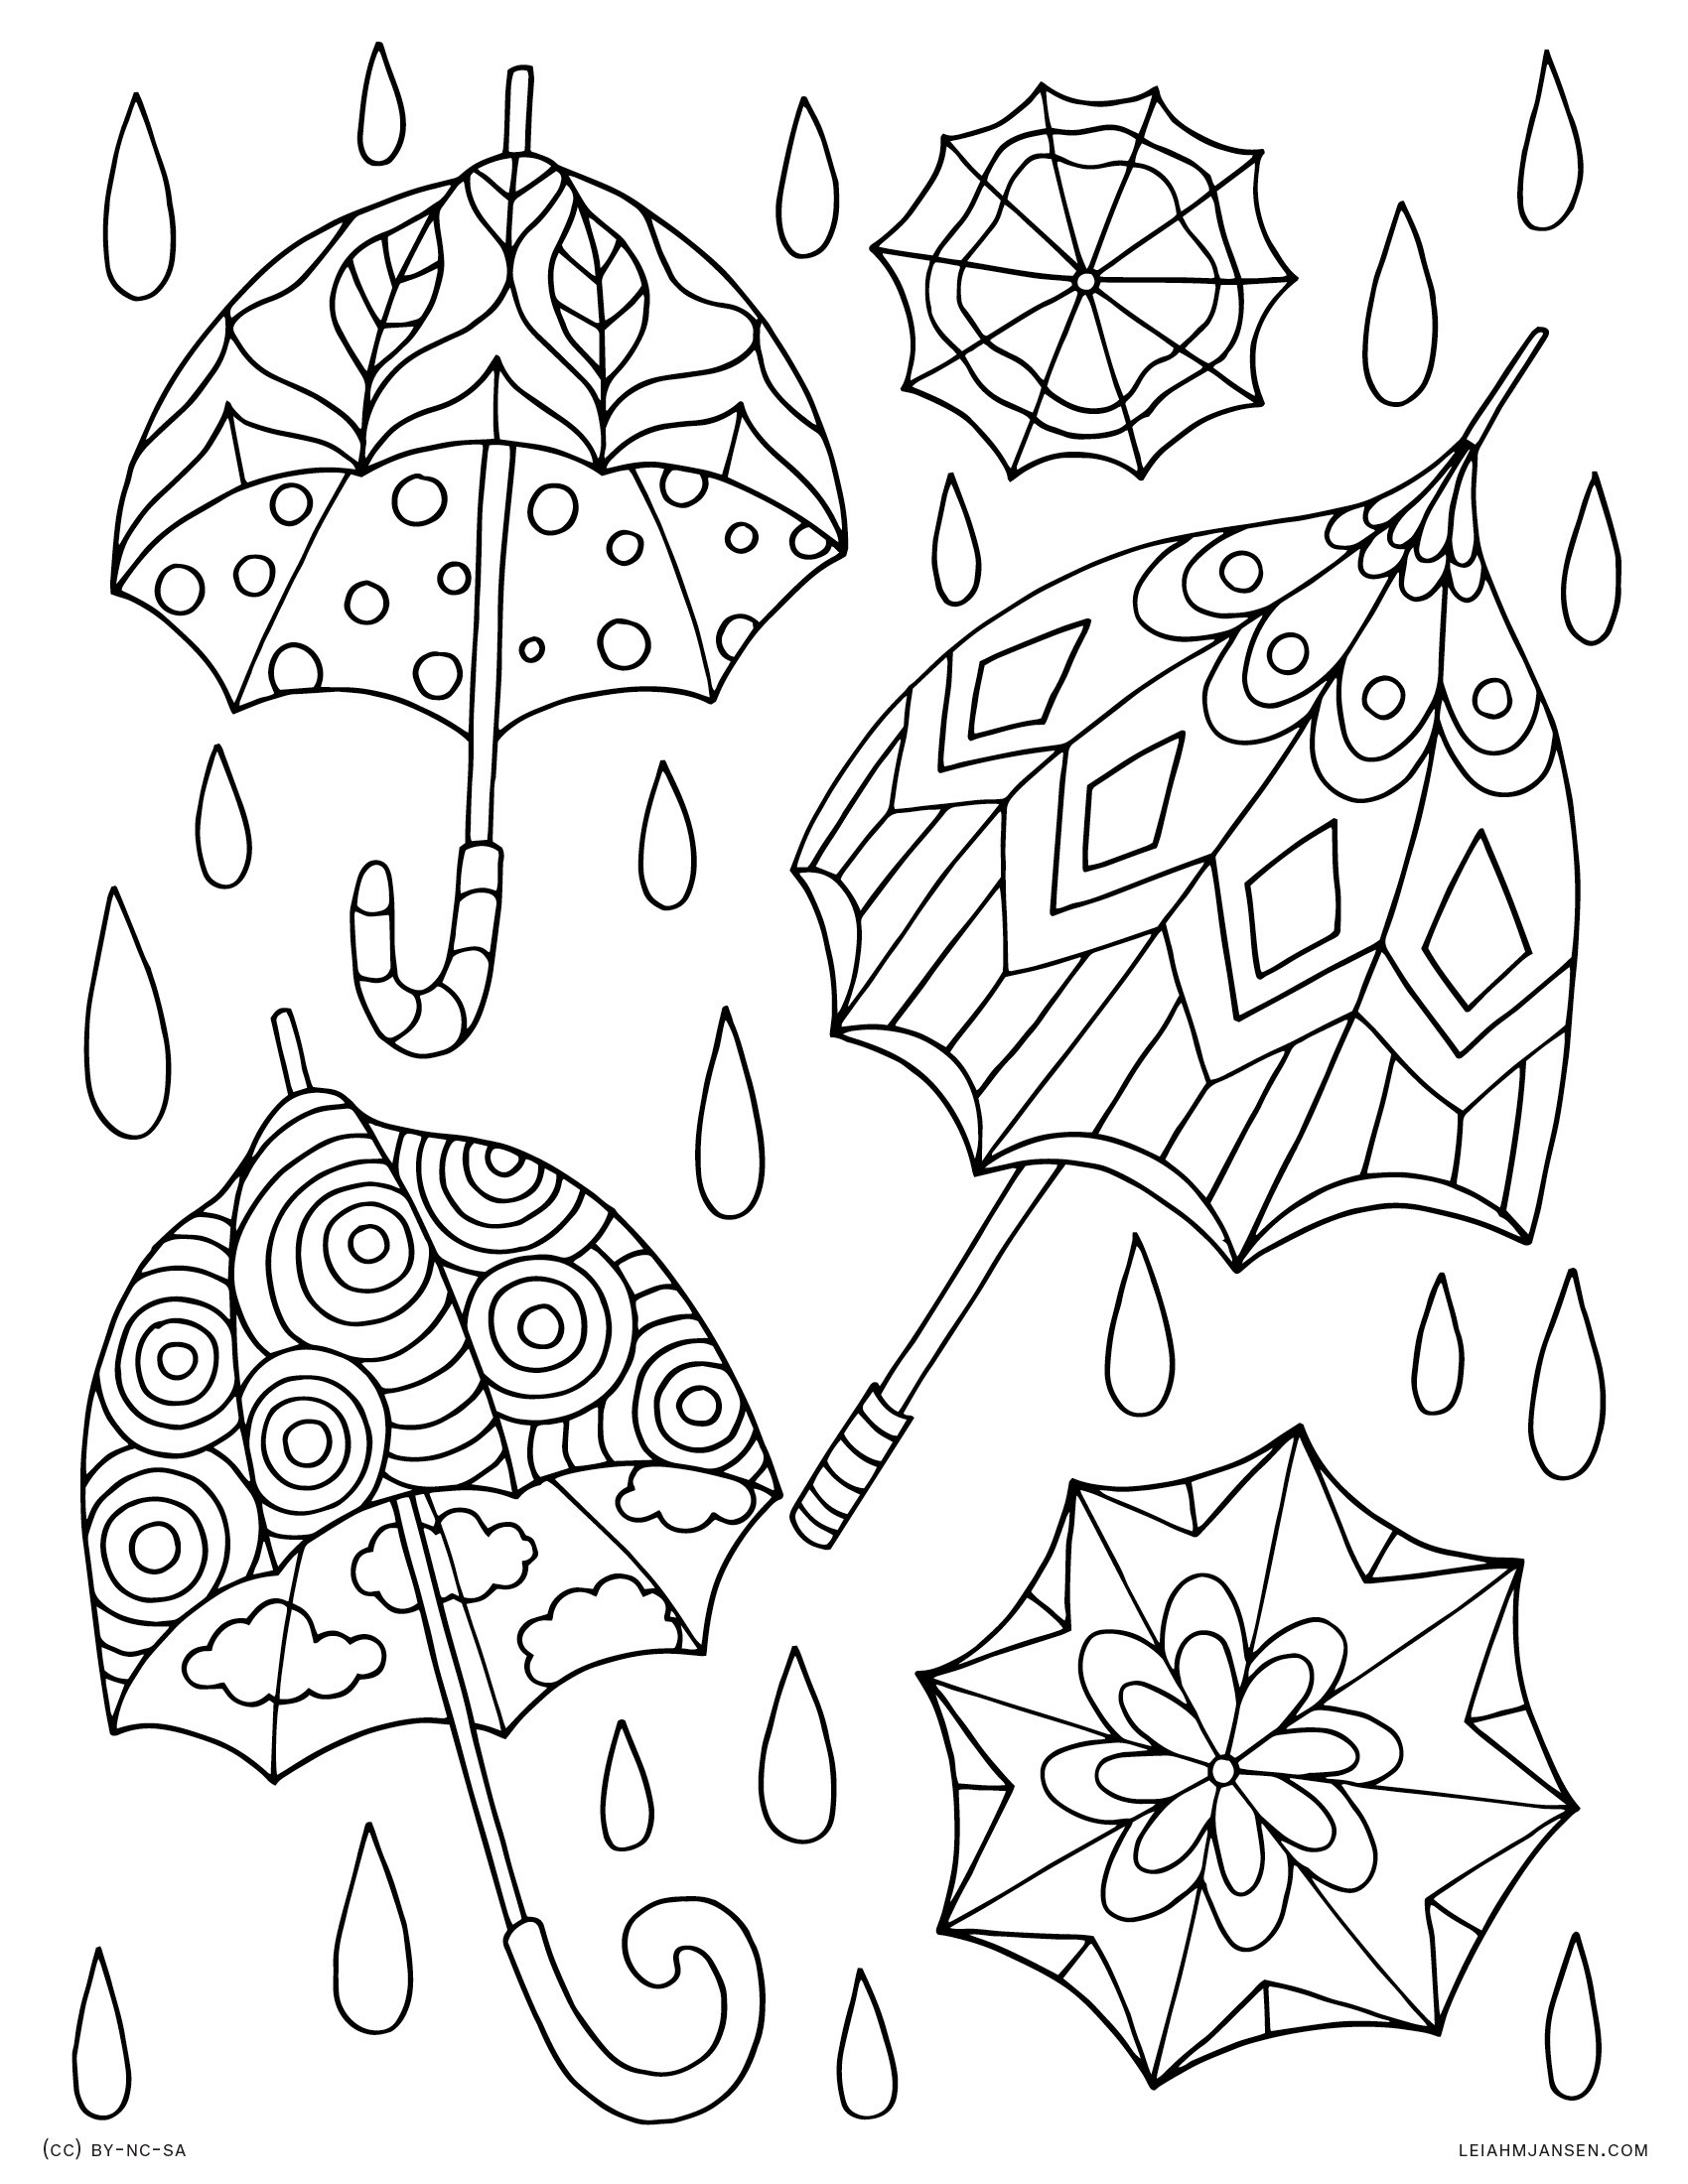 Best ideas about Summer Coloring Pages For Adults
. Save or Pin Coloring Pages Now.